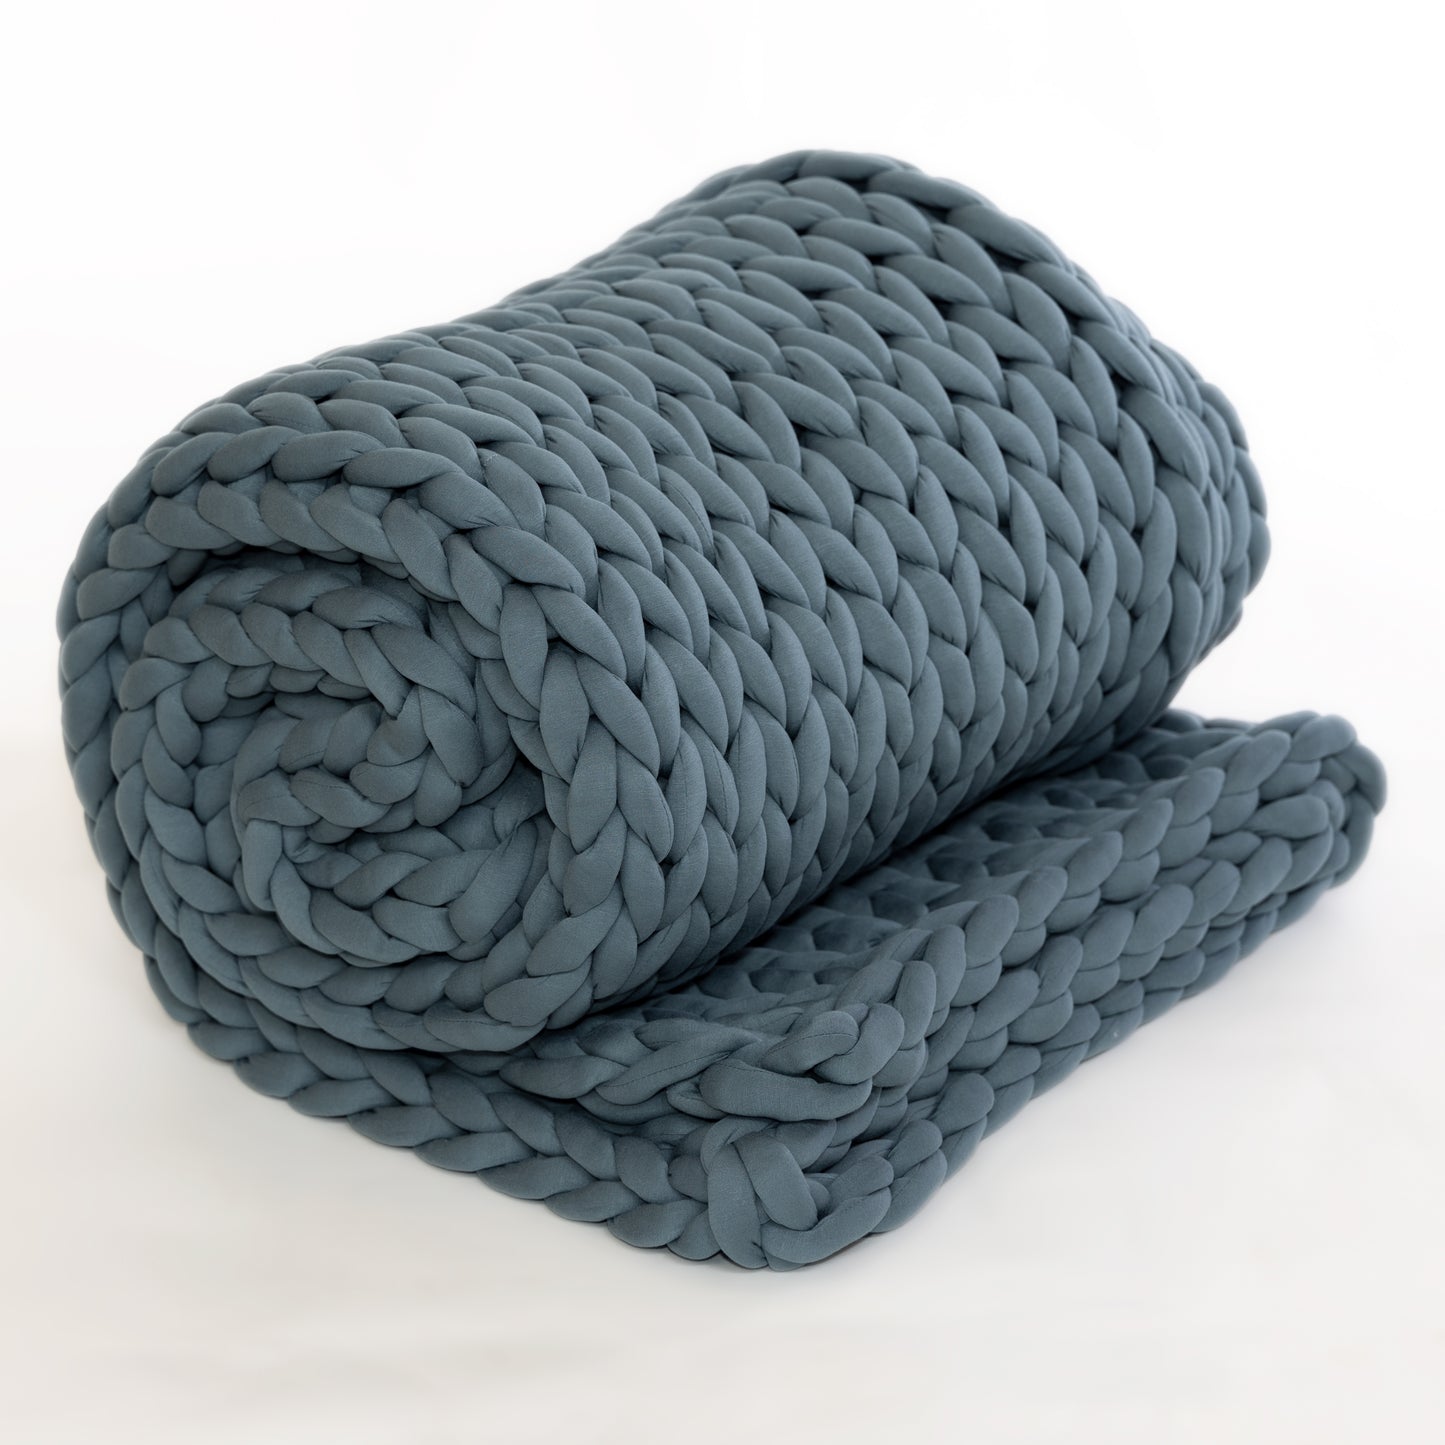 Chunky Knit Weighted Blanket, Queen Size, Spa Blue,18 POUNDS